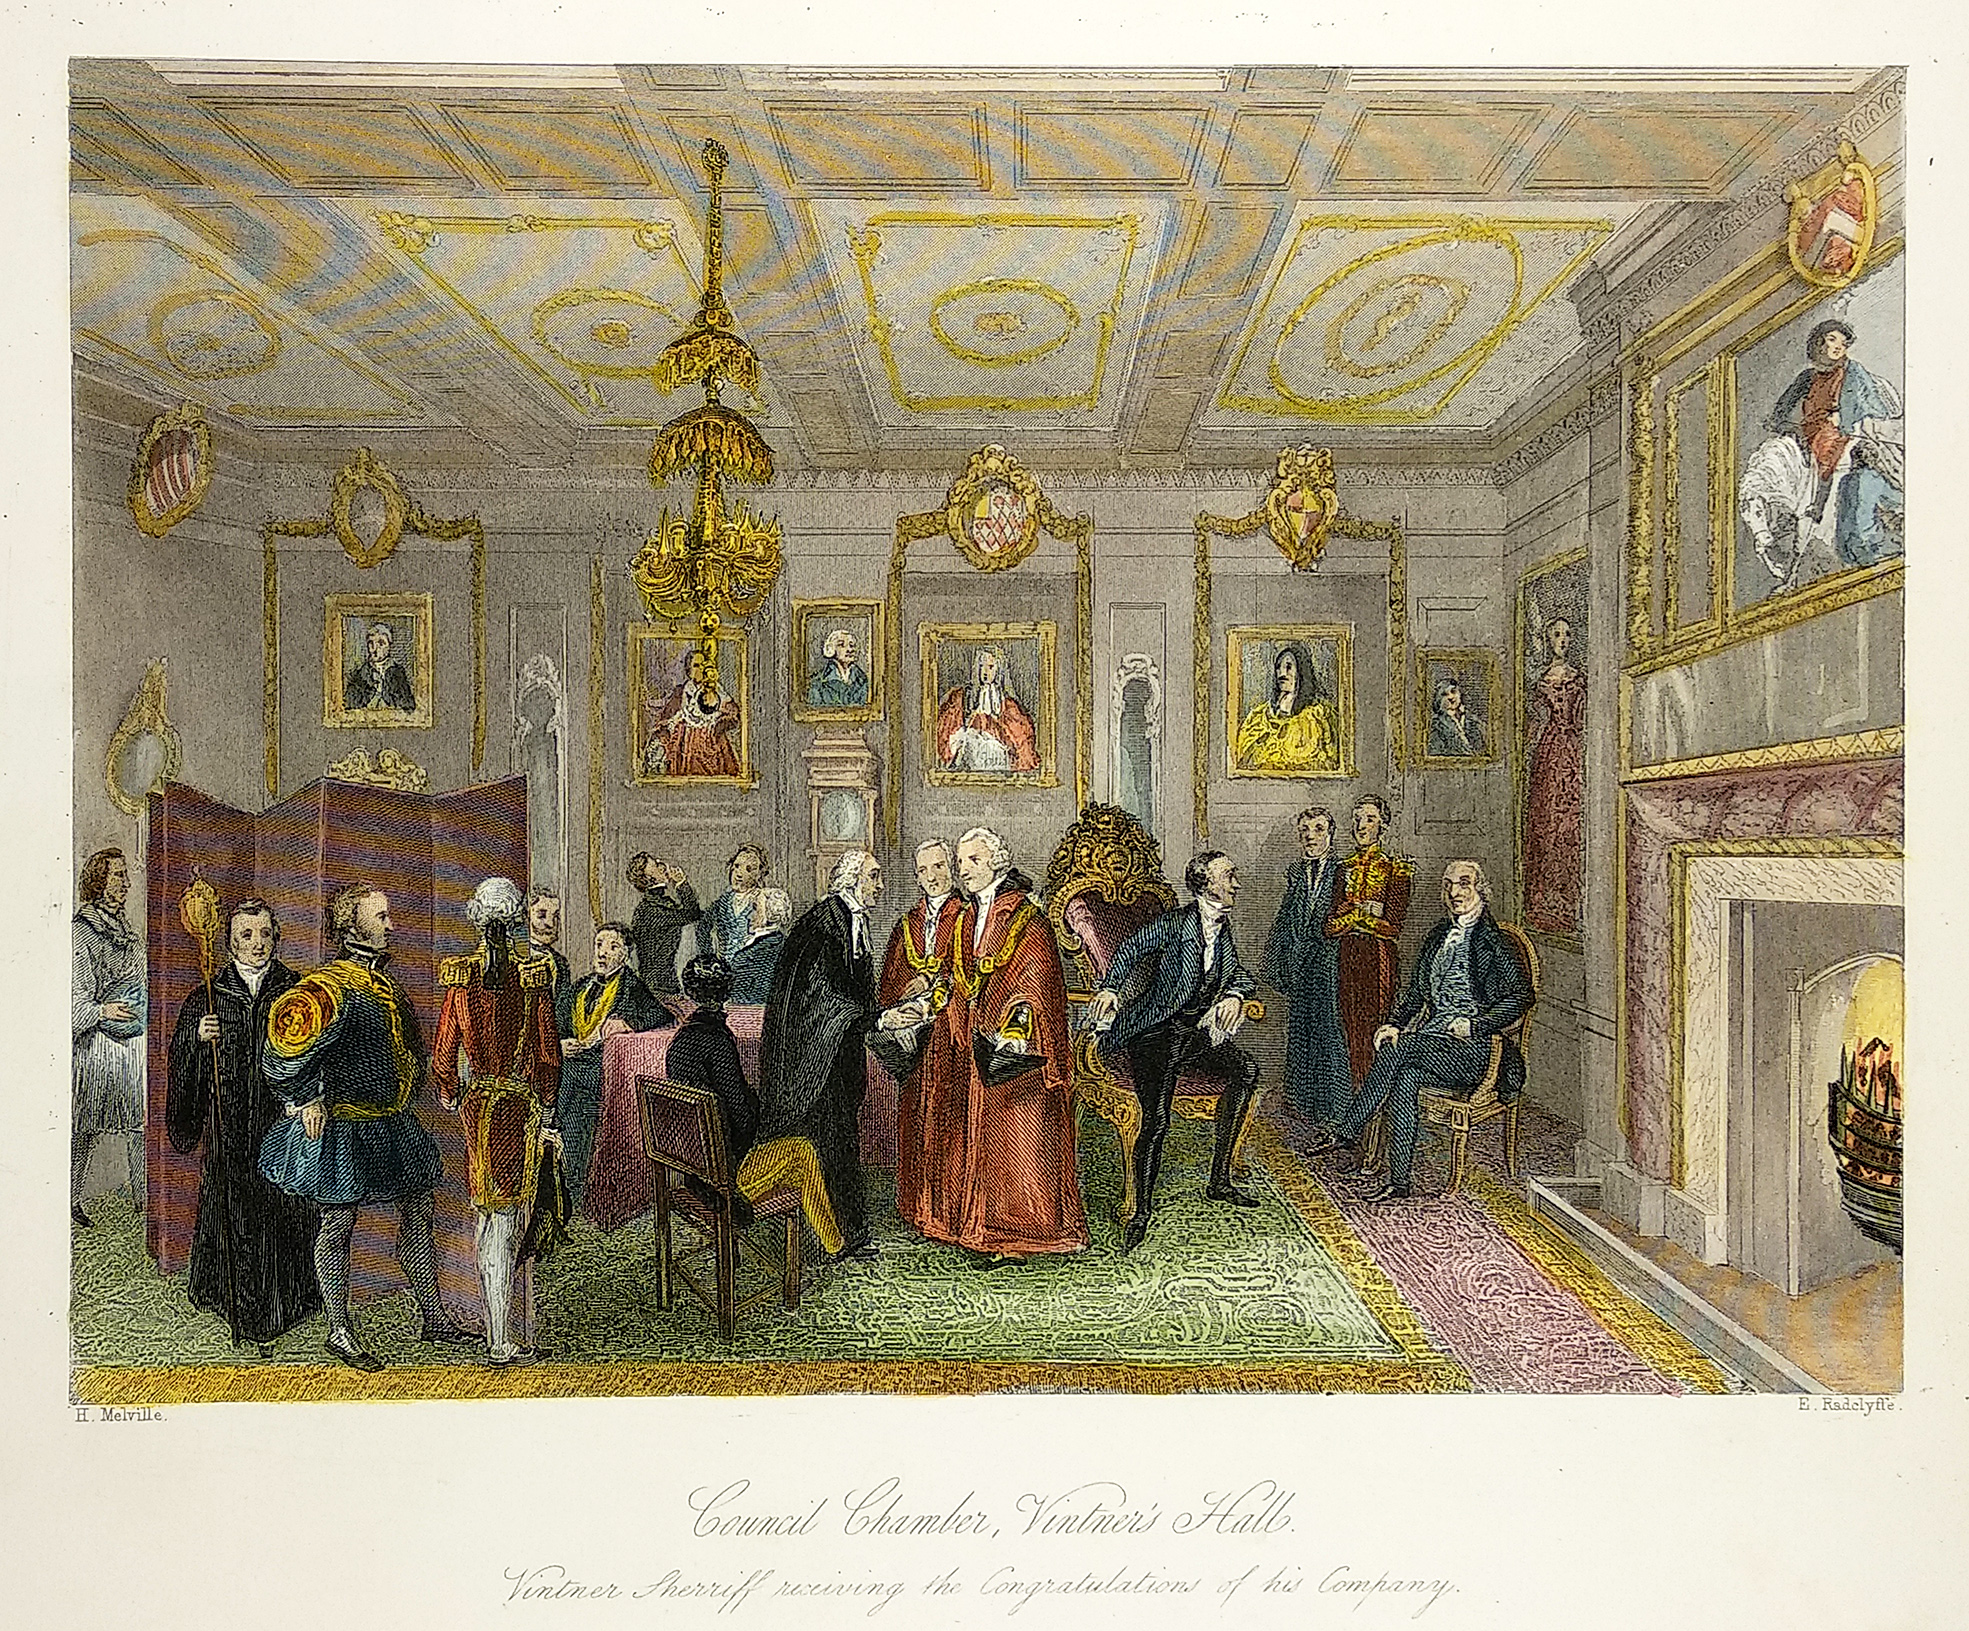 Council Chamber, Vintner's Hall. Vintner Sherriff receiving the Congratulations of his Company. - Antique Print from 1841